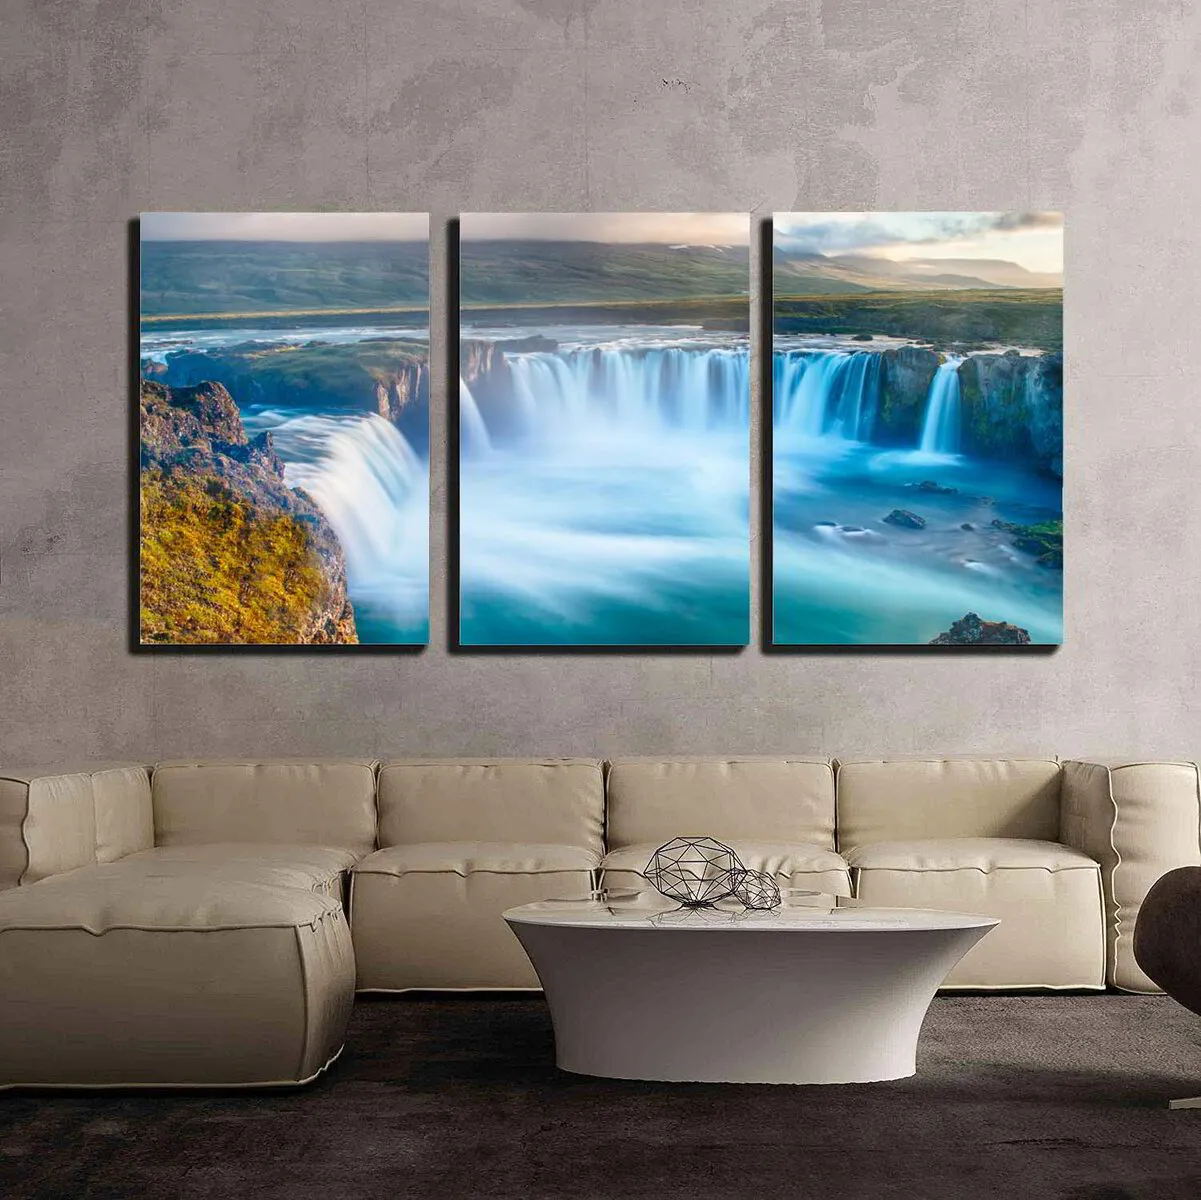 S3 Printed Acoustic Panels - Grand Blue Waterfall - 3 Panels